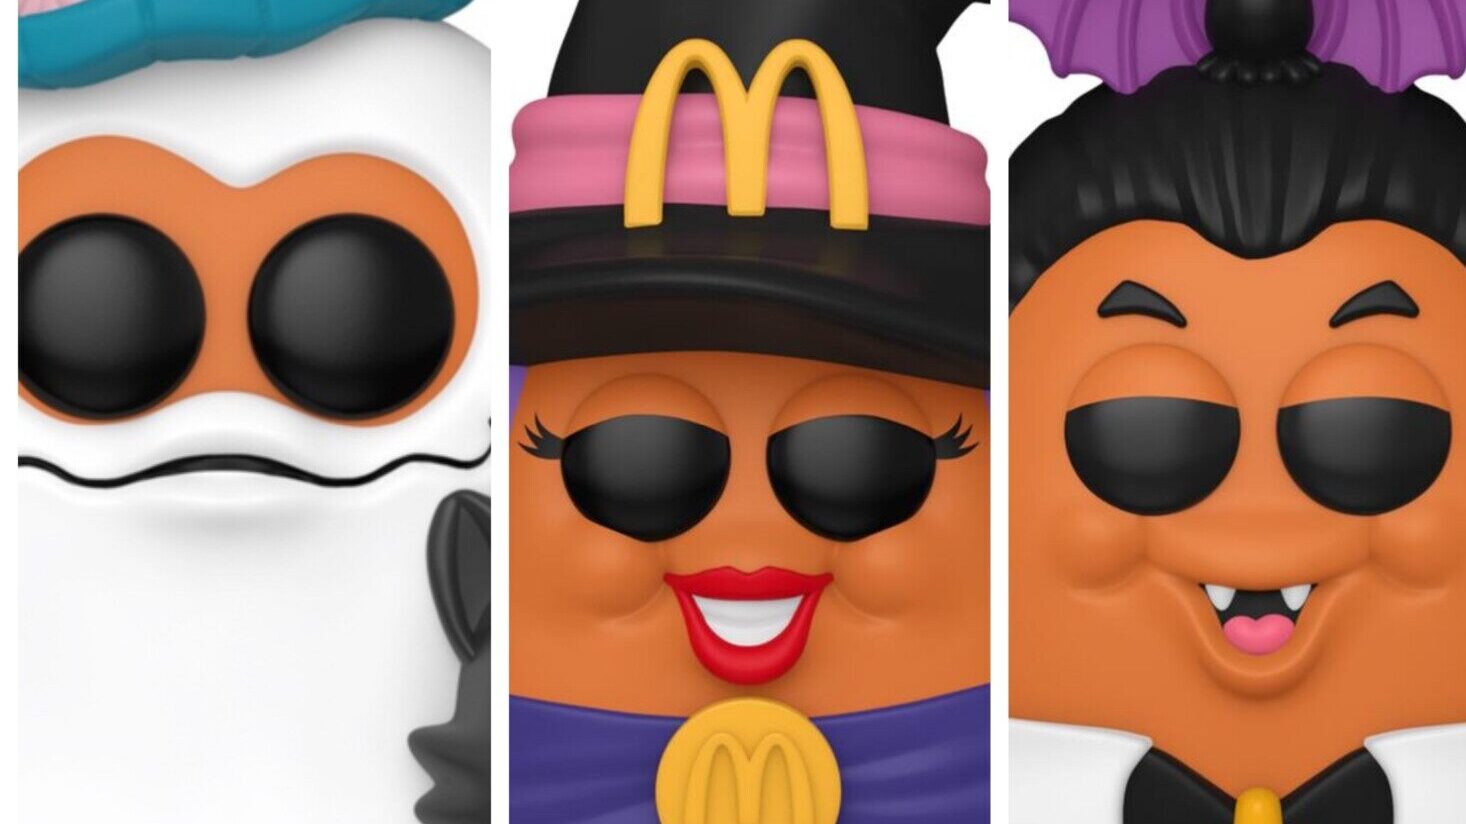 McNugget figurines from Funko Pop